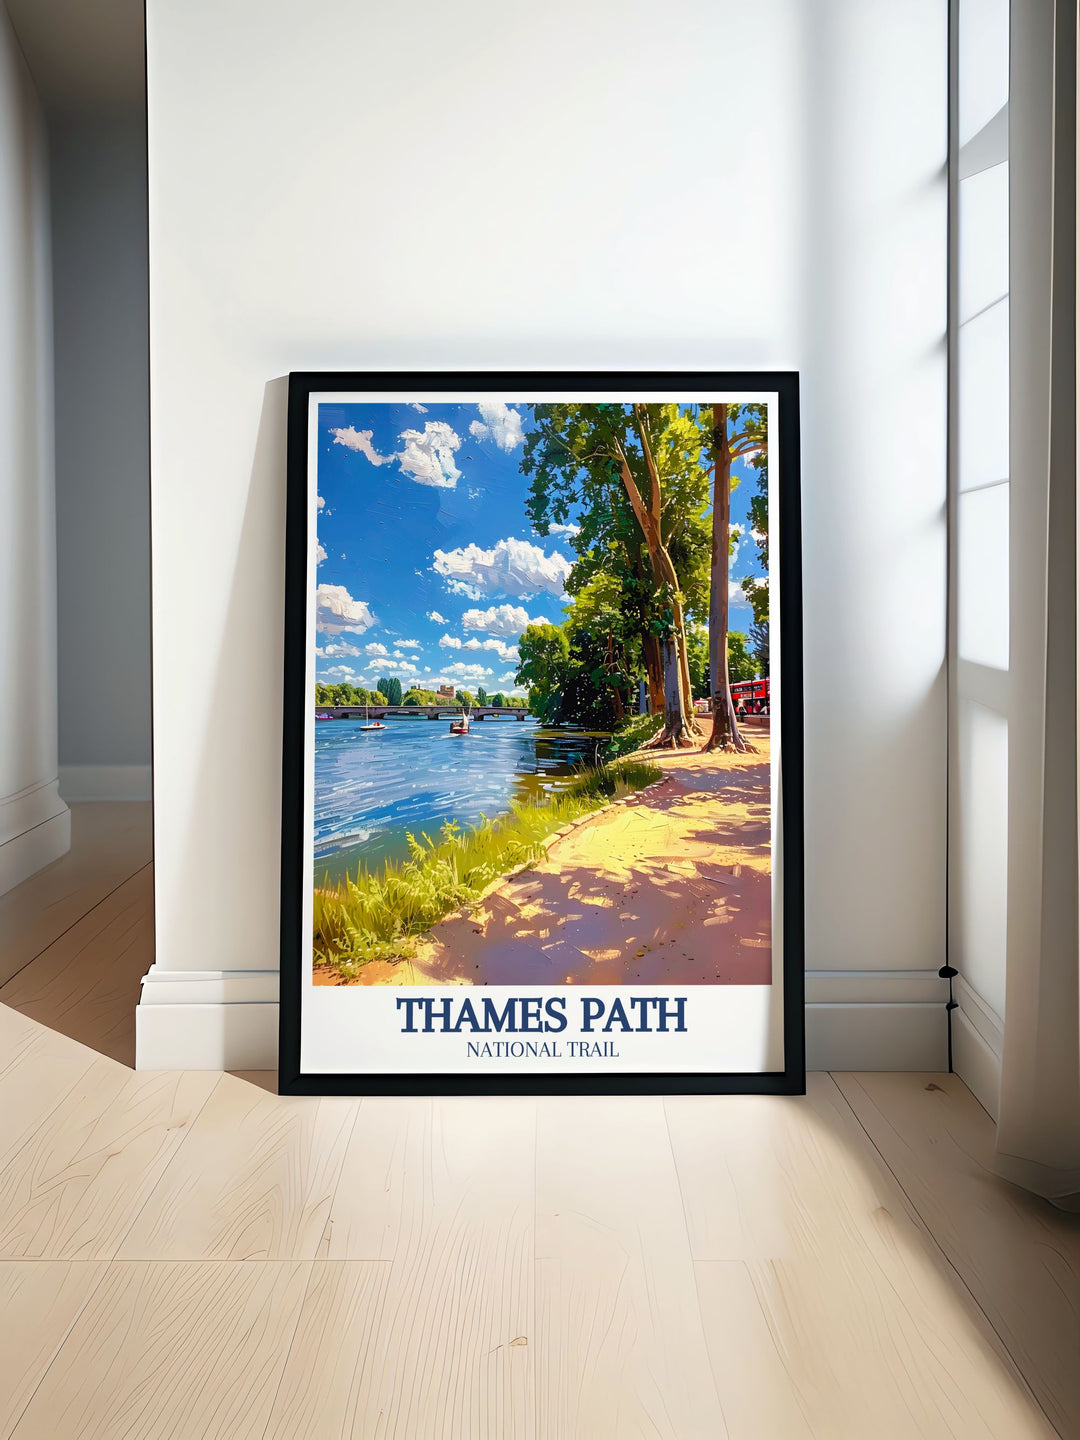 Exquisite River Thames travel poster featuring the scenic beauty of Richmond London and the historic Thames Path perfect for adding a touch of elegance to any room and ideal for art enthusiasts and London lovers